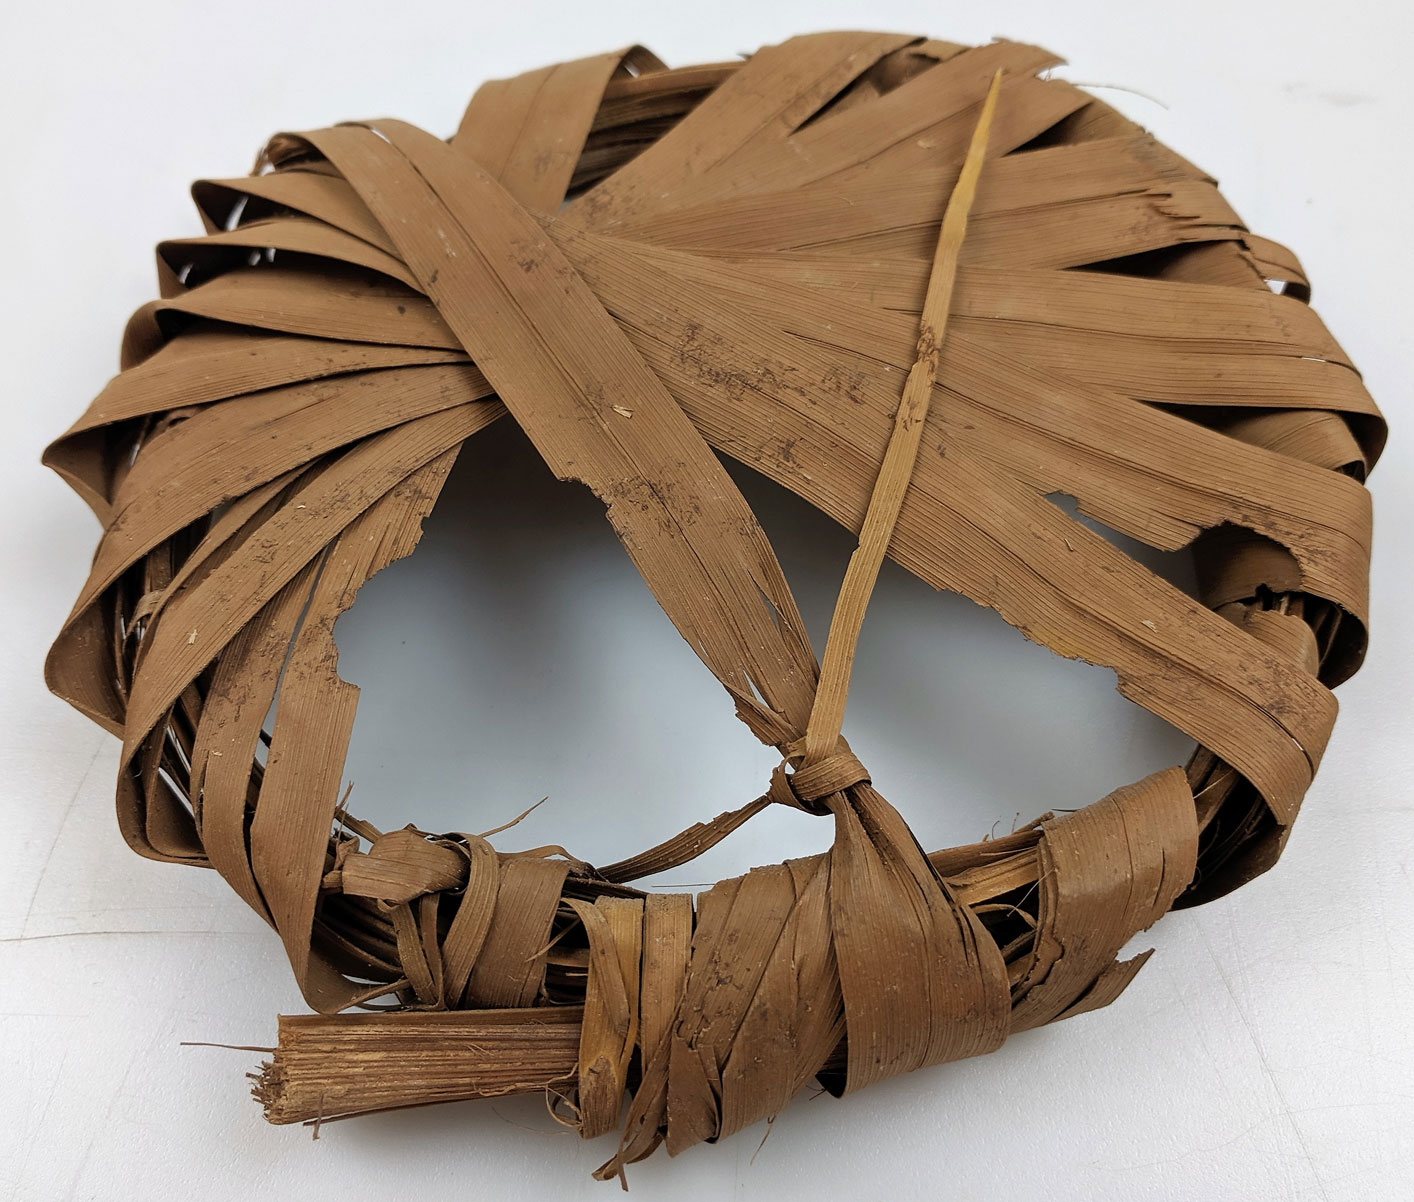 A round brown Egyptian object made out of date palm leaves.